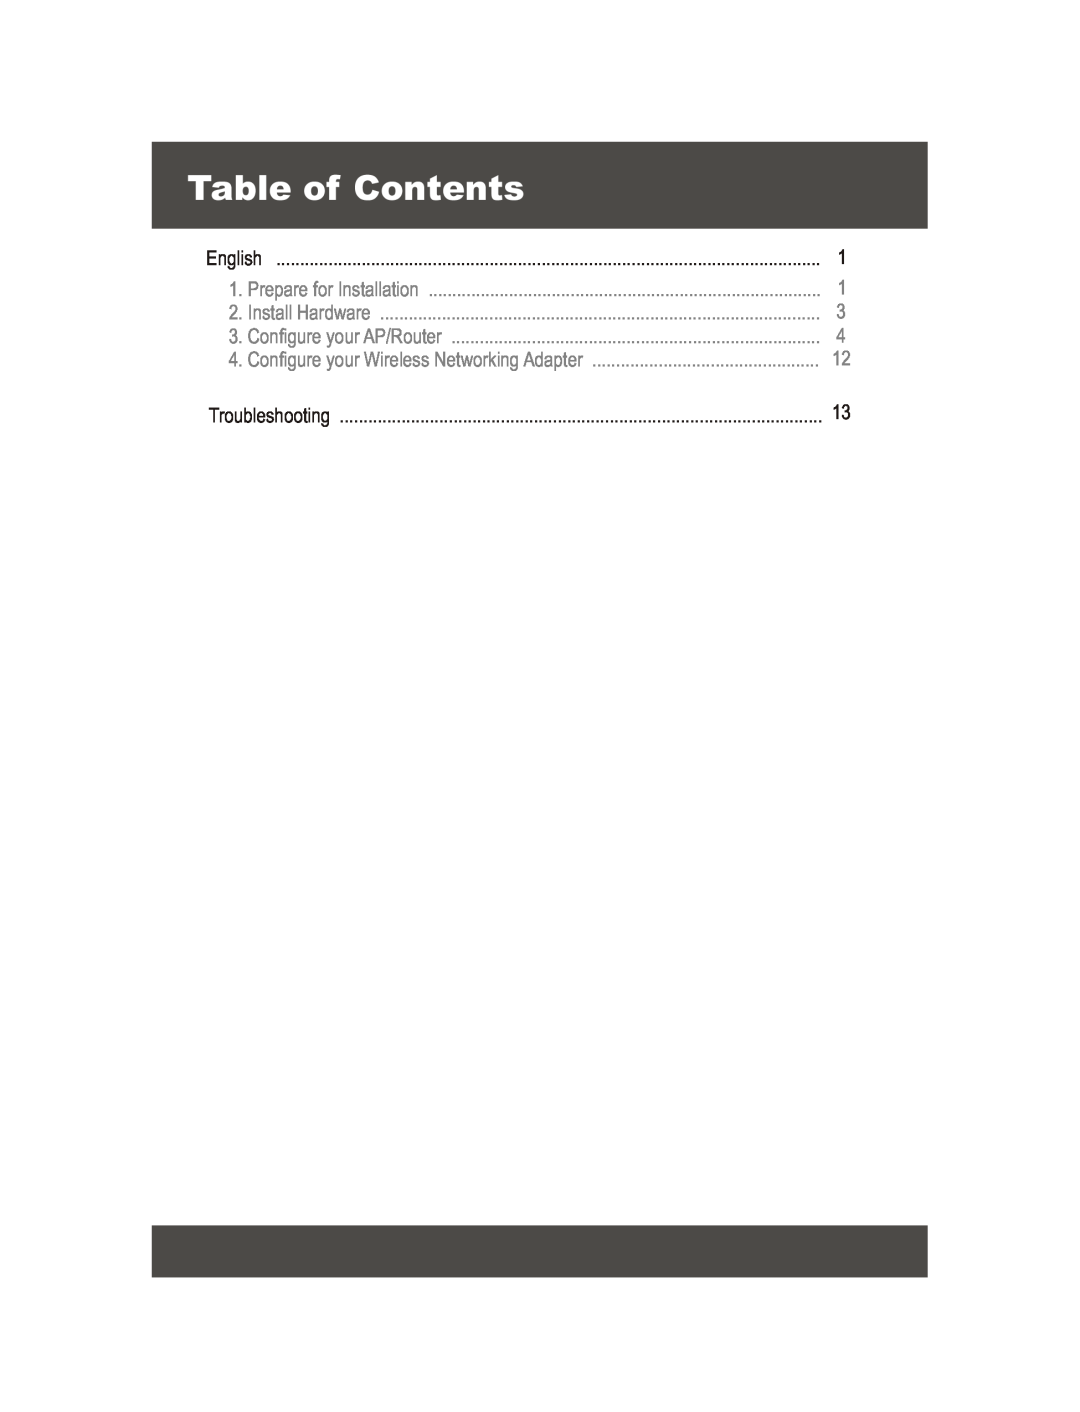 TRENDnet TEW-611BRP manual Table of Contents, Configure your Wireless Networking Adapter, Prepare for Installation 